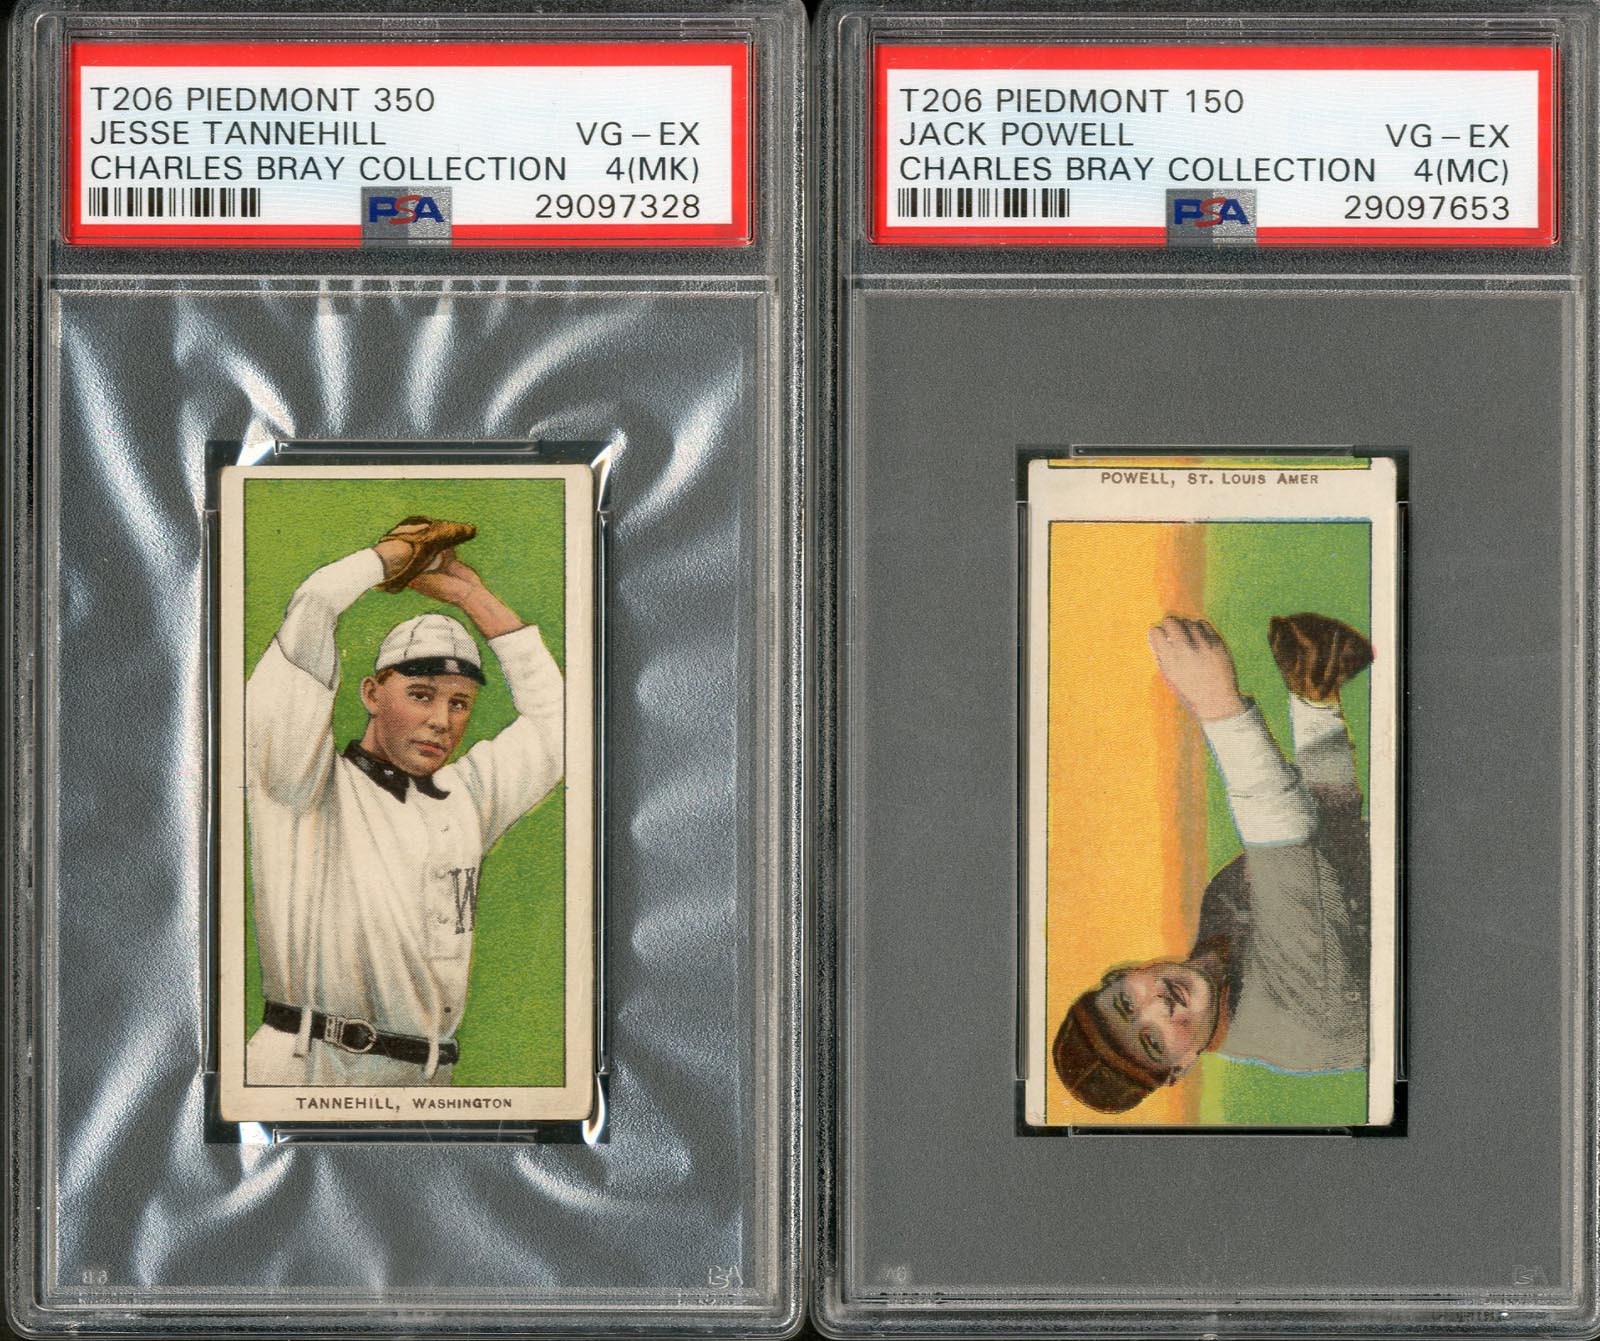 - T206 Pair of PSA Graded From the Charles Bray Collection.